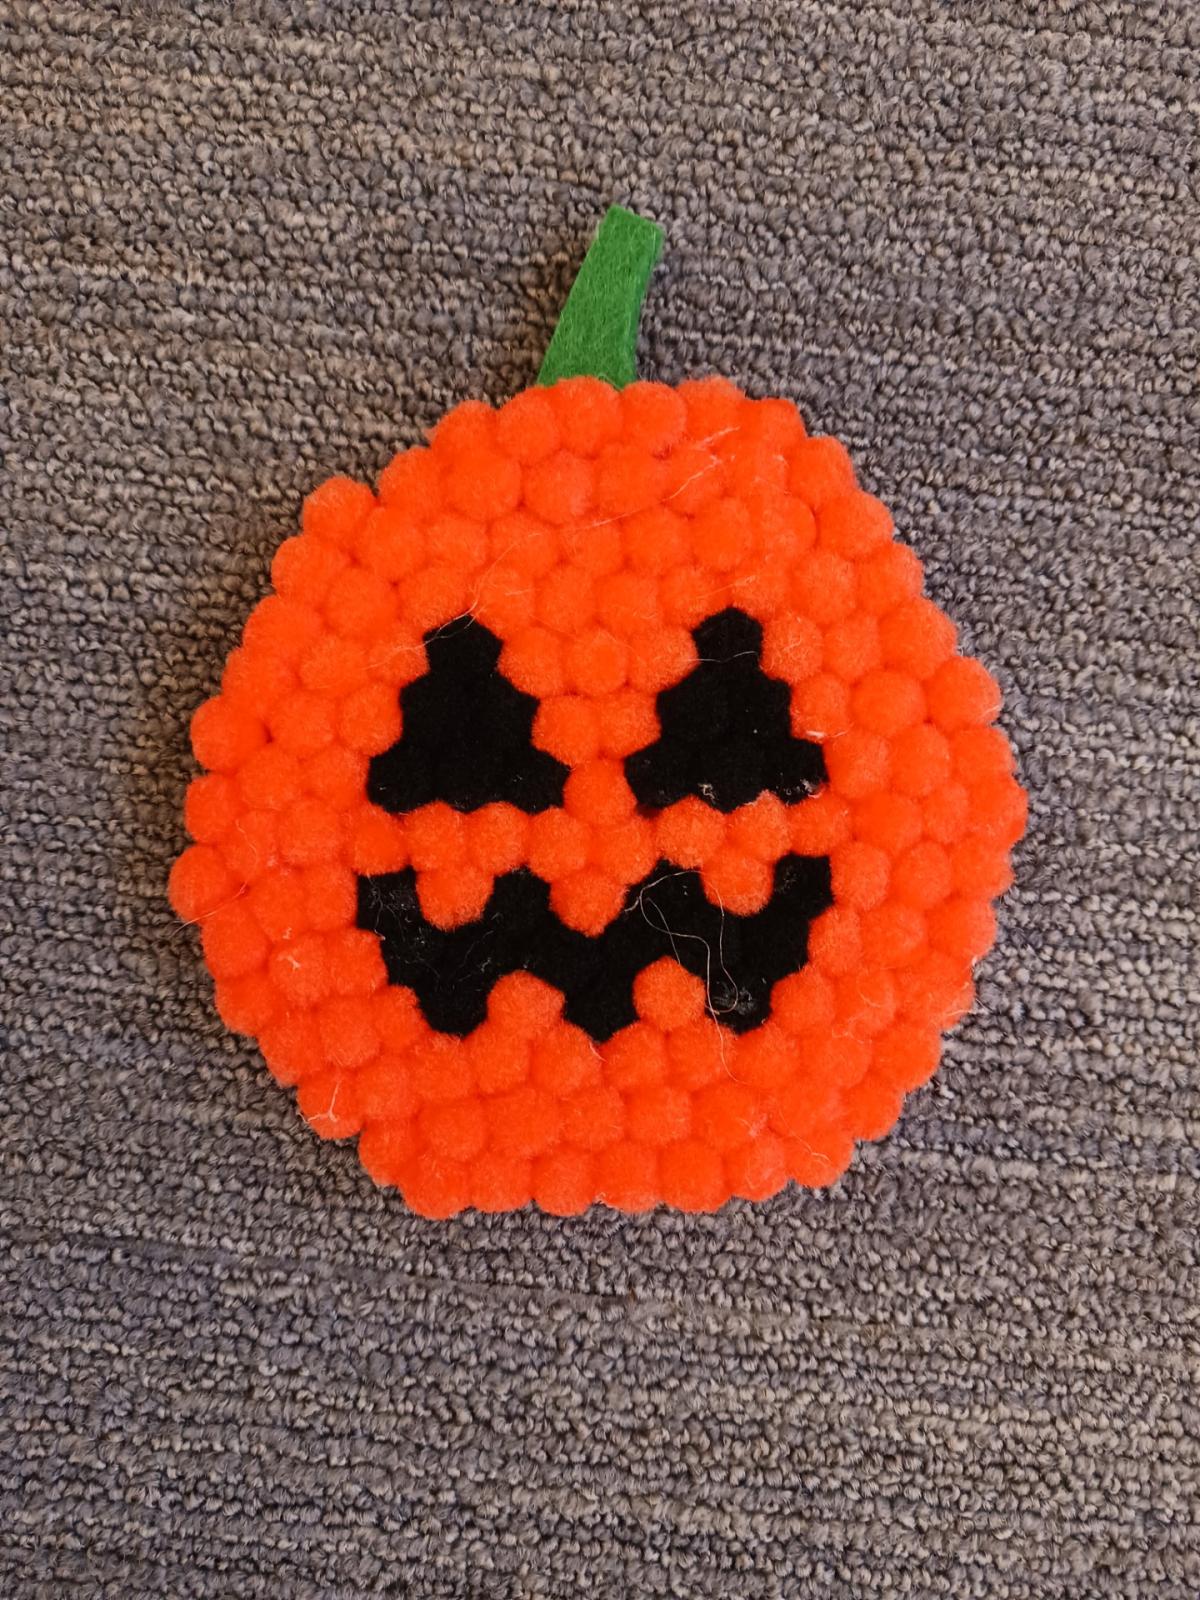 Stop in and make your own mini pompom Pumpkin Coaster.